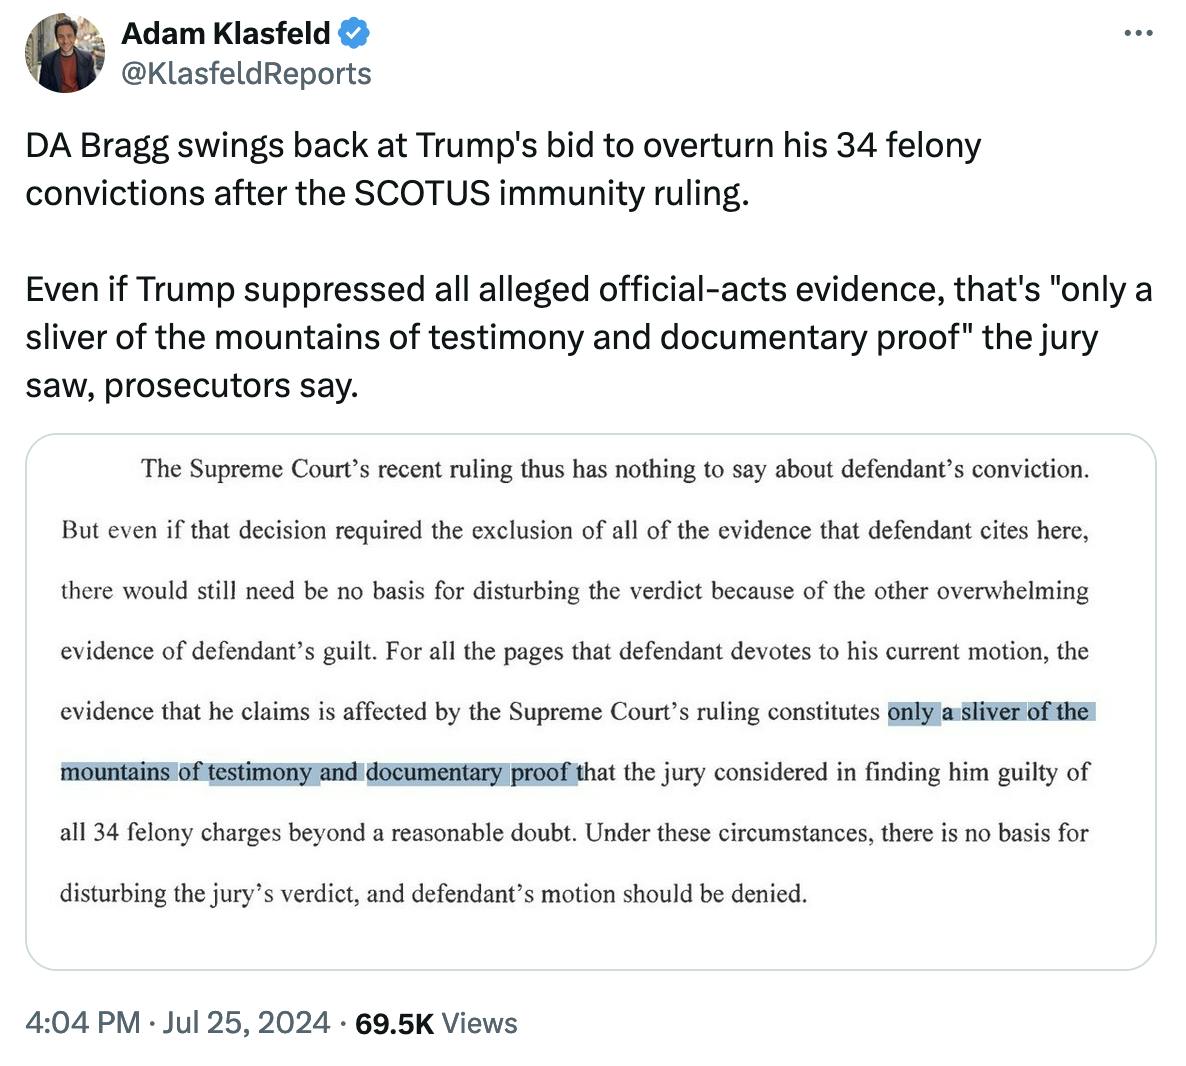 Twitter screenshot Adam Klasfeld @KlasfeldReports DA Bragg swings back at Trump's bid to overturn his 34 felony convictions after the SCOTUS immunity ruling. Even if Trump suppressed all alleged official-acts evidence, that's "only a sliver of the mountains of testimony and documentary proof" the jury saw, prosecutors say.